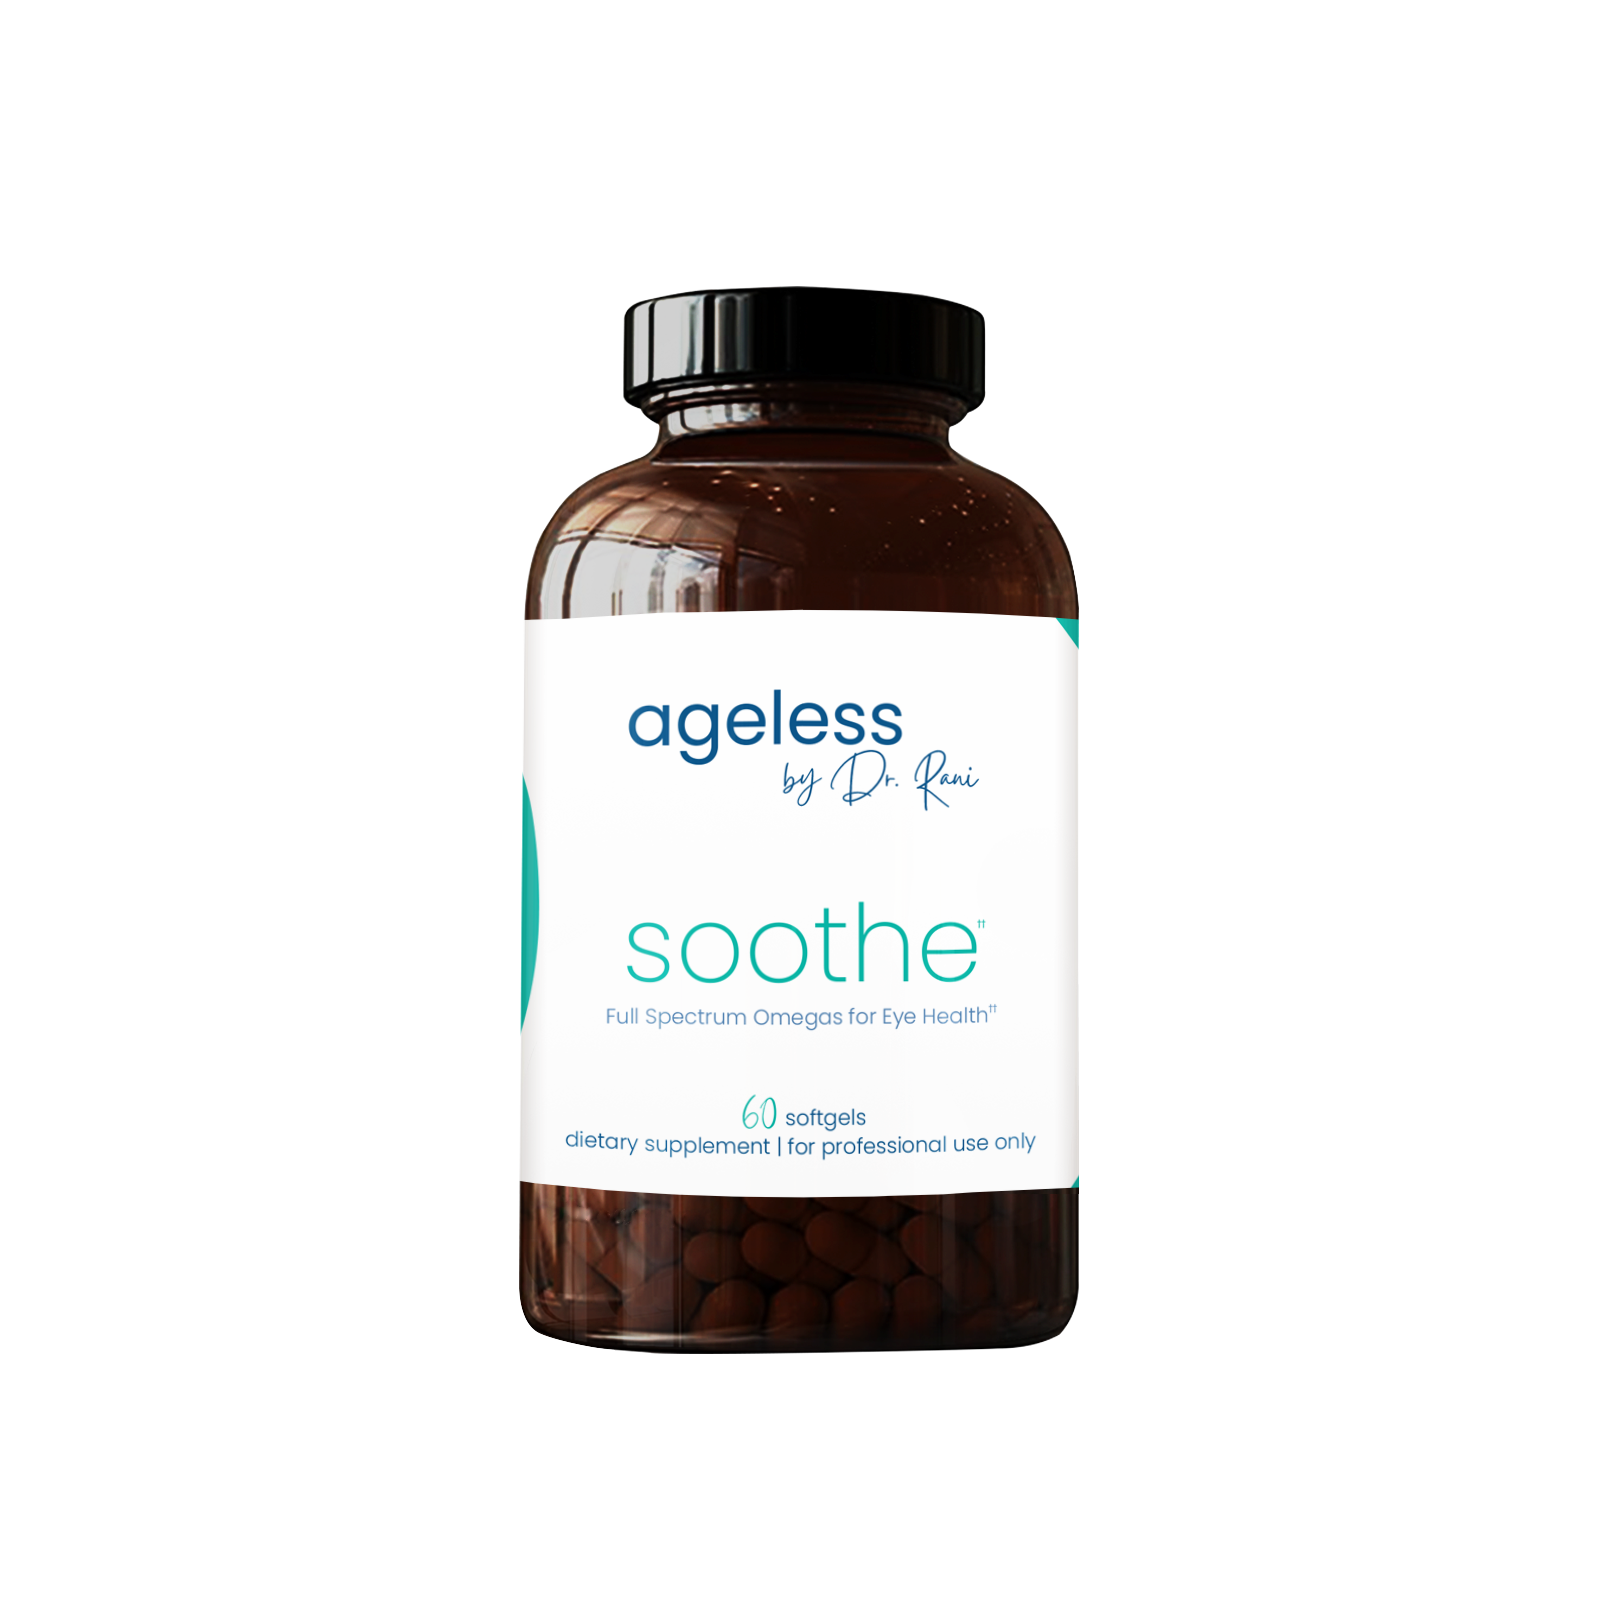 Soothe - 3 Month Supply